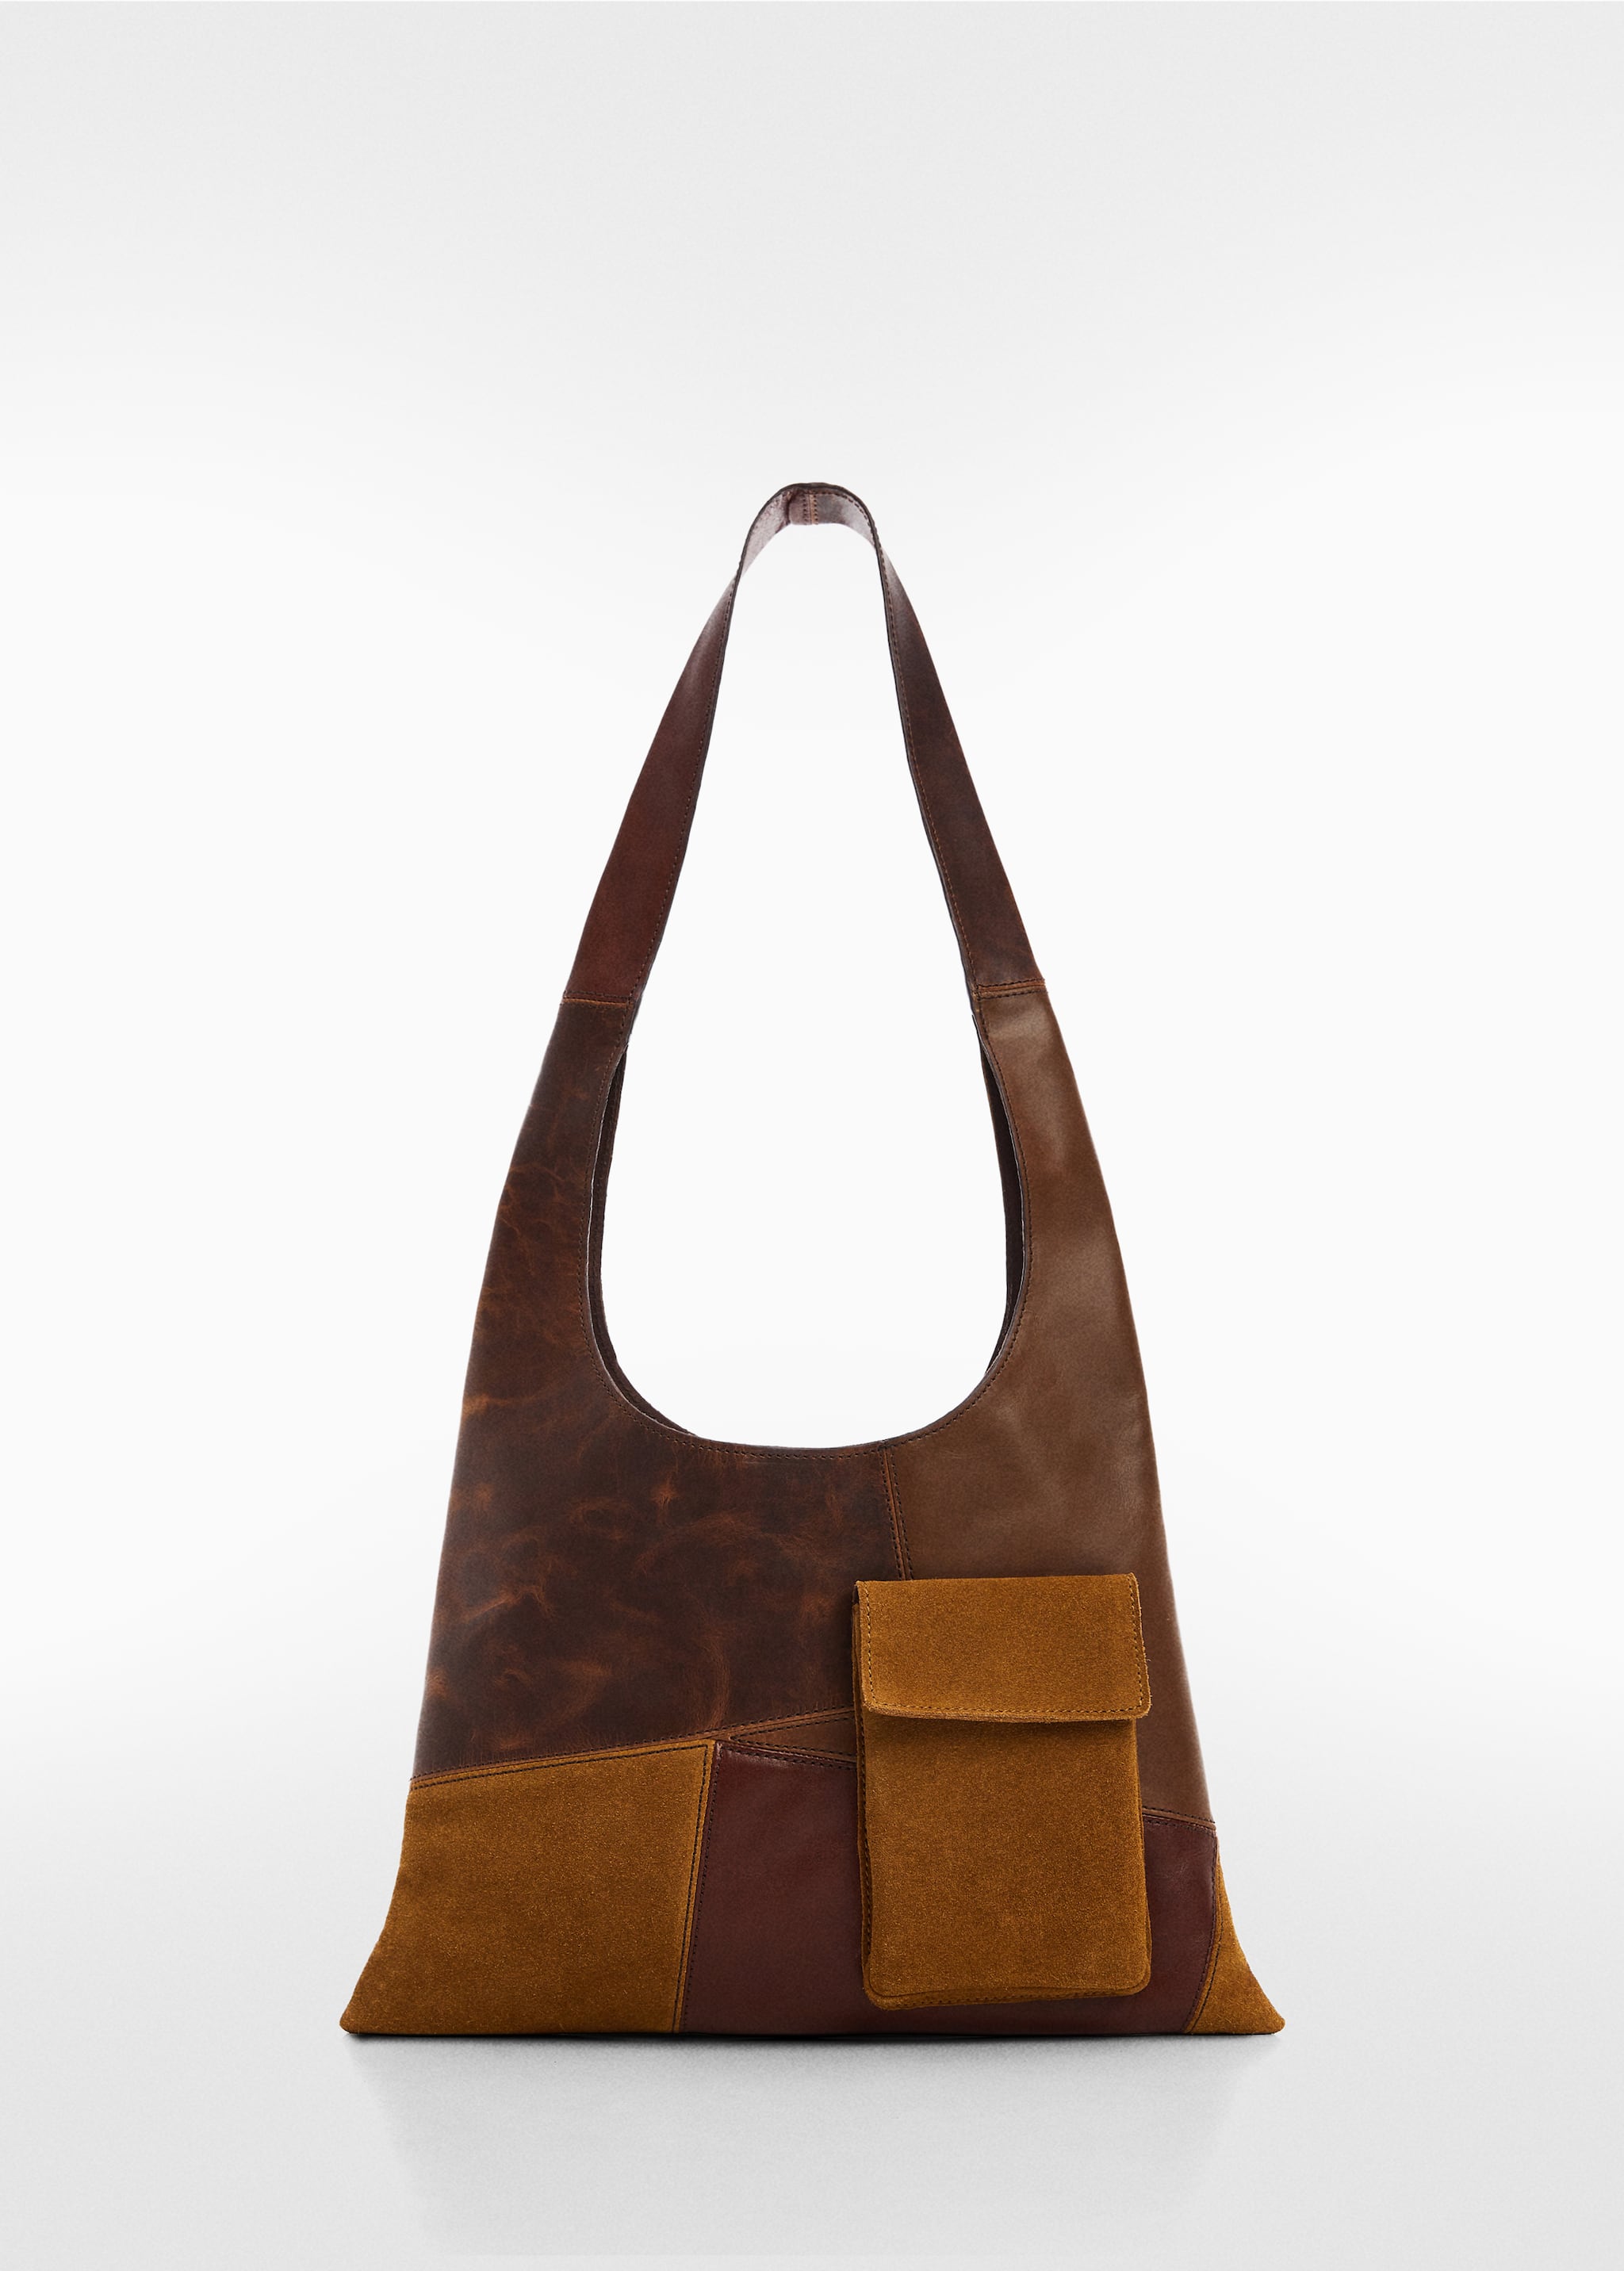 Patchwork leather bag - Article without model